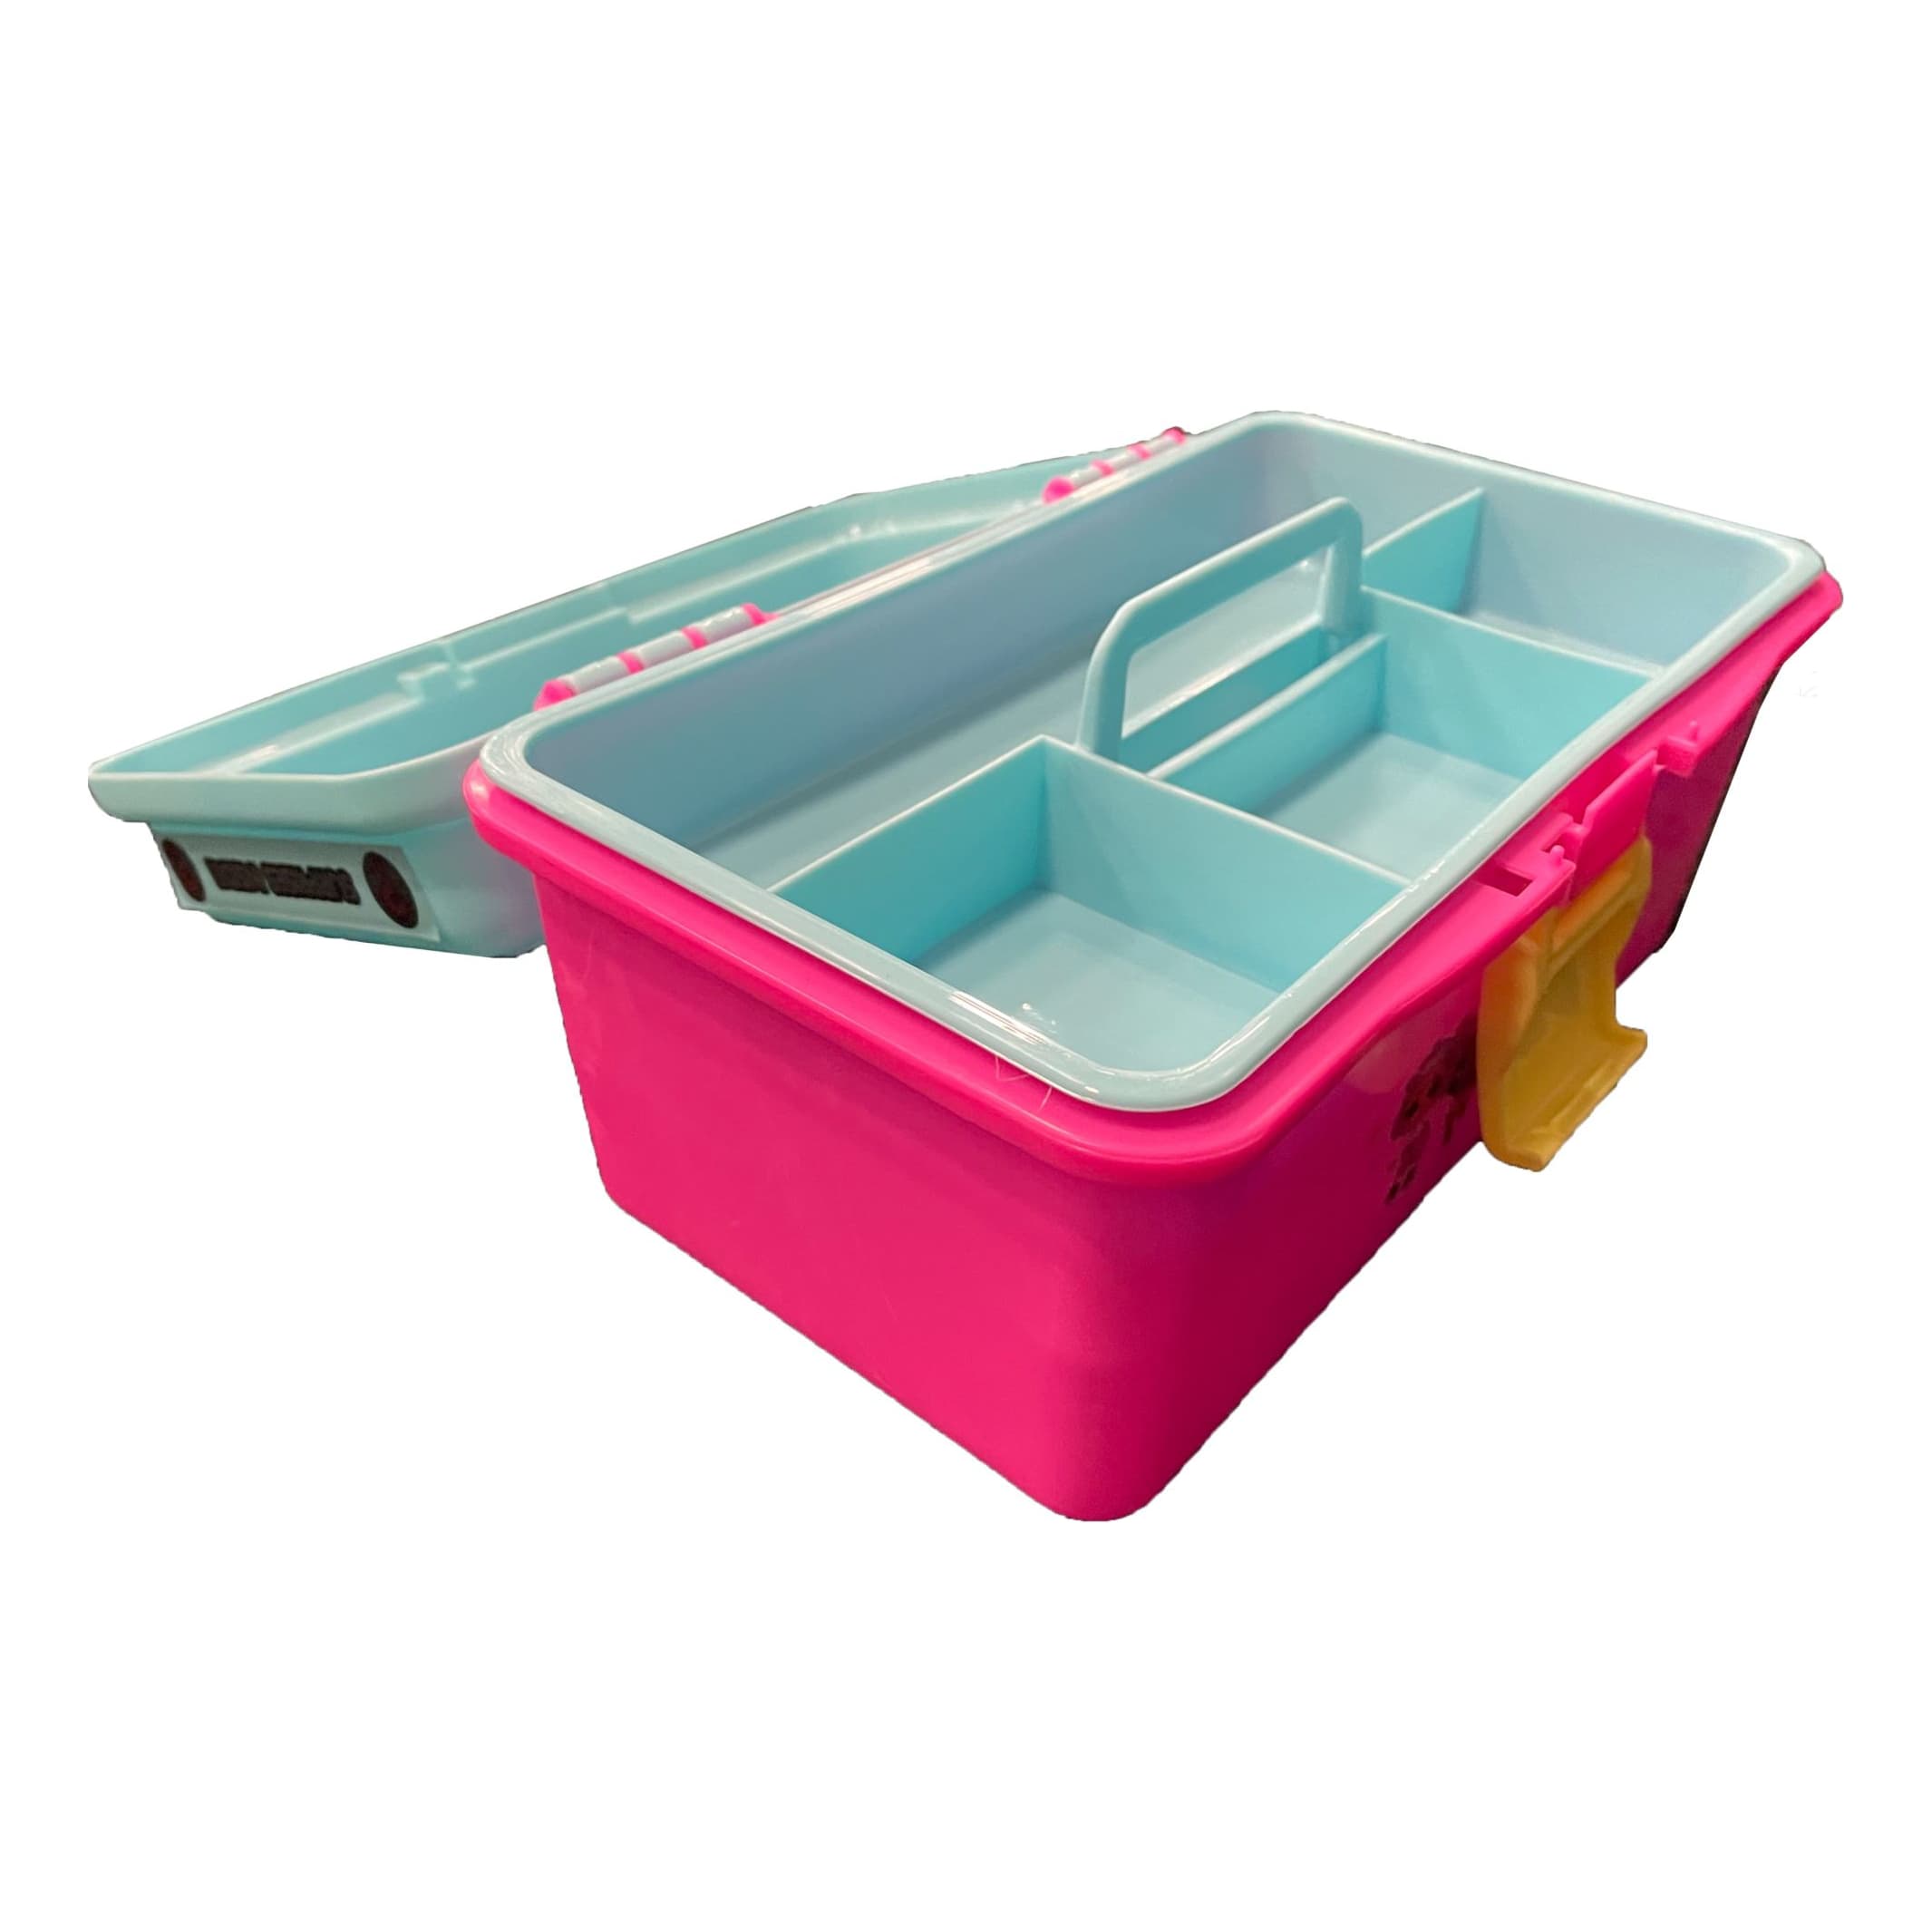 Kid Casters® LOL Surprise Tackle Box